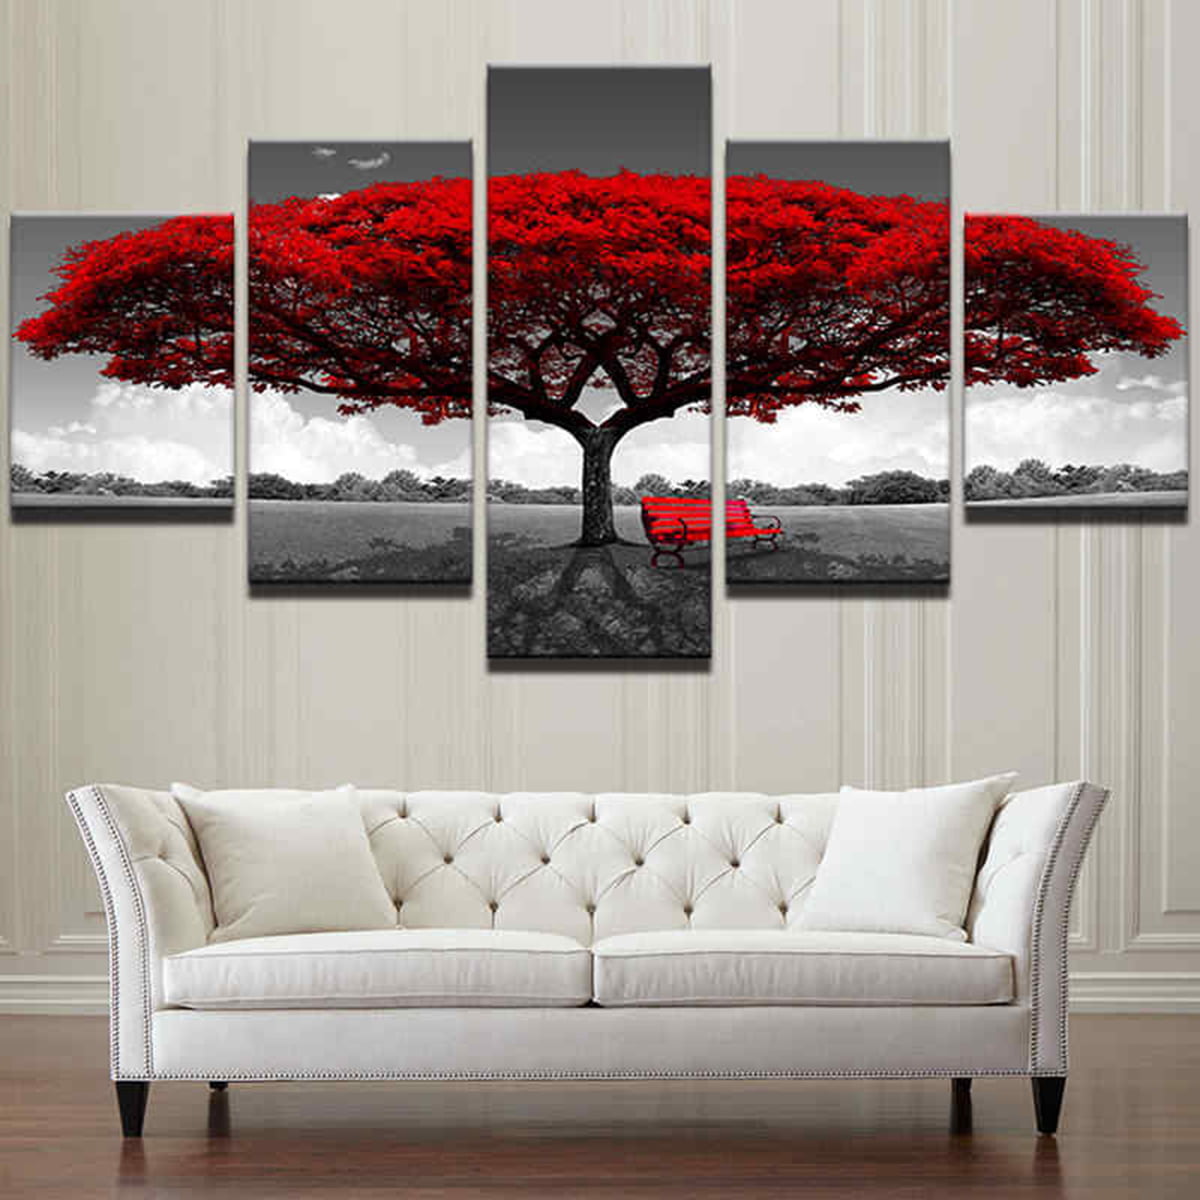 No-Frame Large Wall Art Canvas Painting for Living Room, 5 Pieces Red Tree Picture Prints Poster Artwork Home Decoration (Frame NOT INCLUDED) - Walmart.com